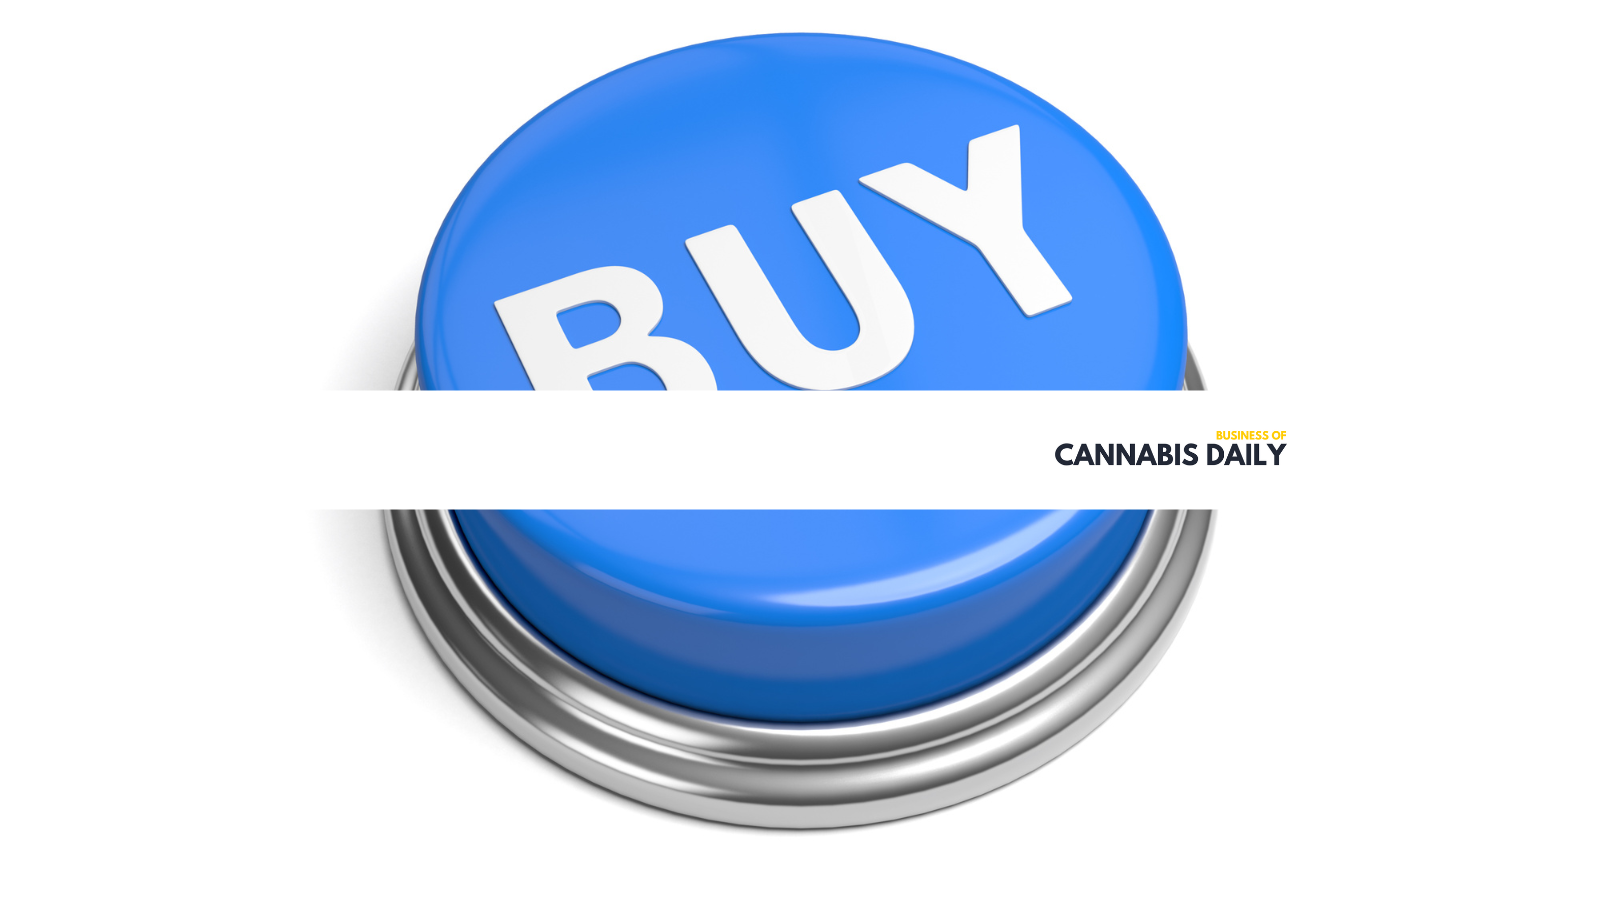 green thumb industries investors conference call in the cannabis news